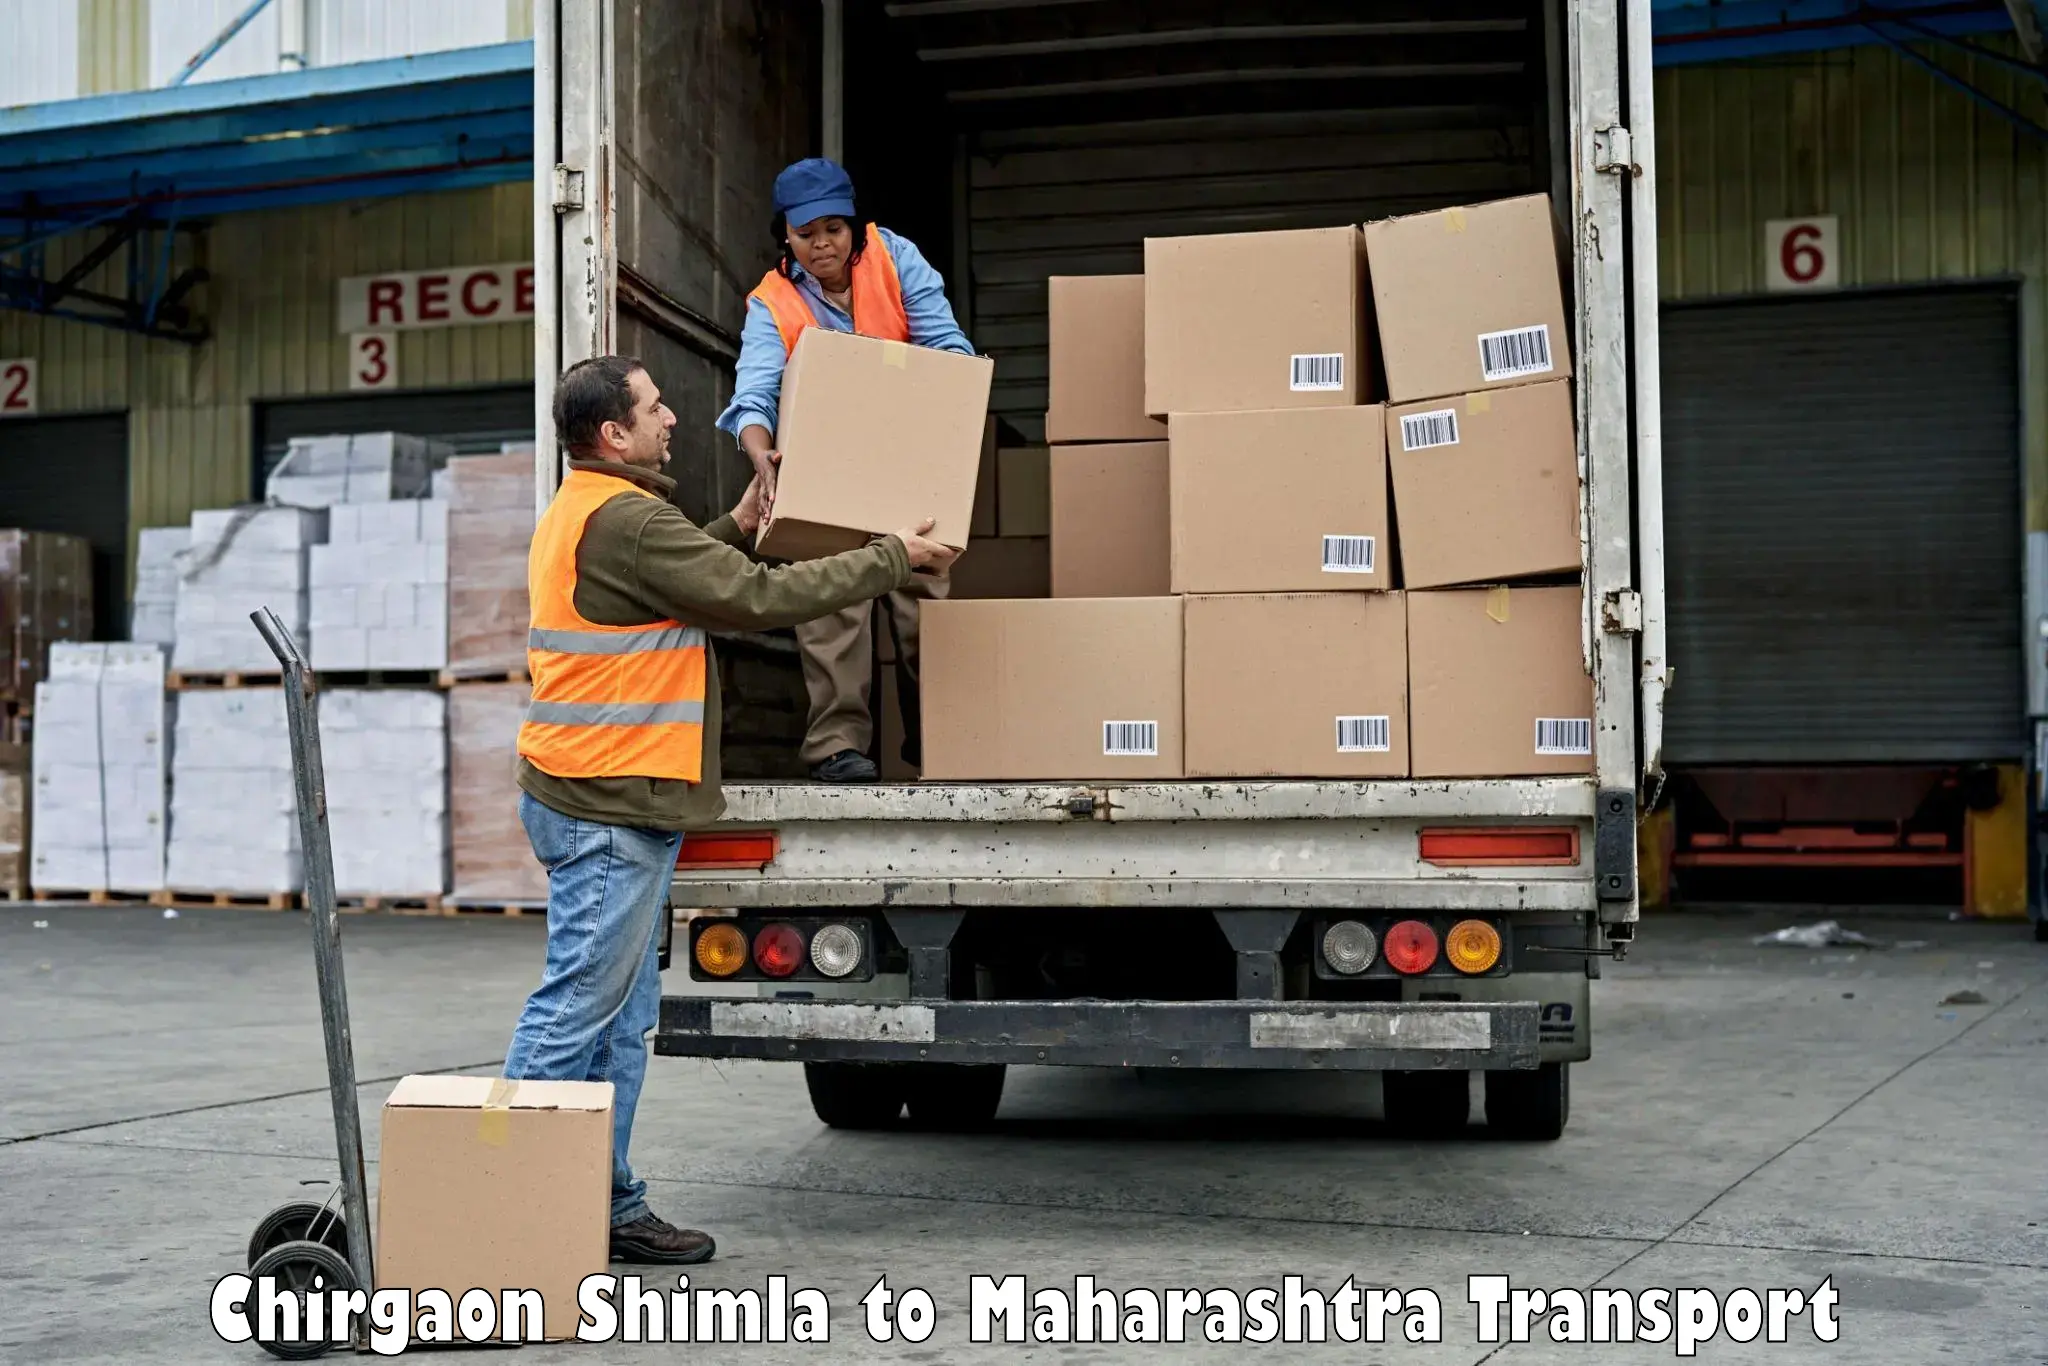 Truck transport companies in India in Chirgaon Shimla to Loha Nanded